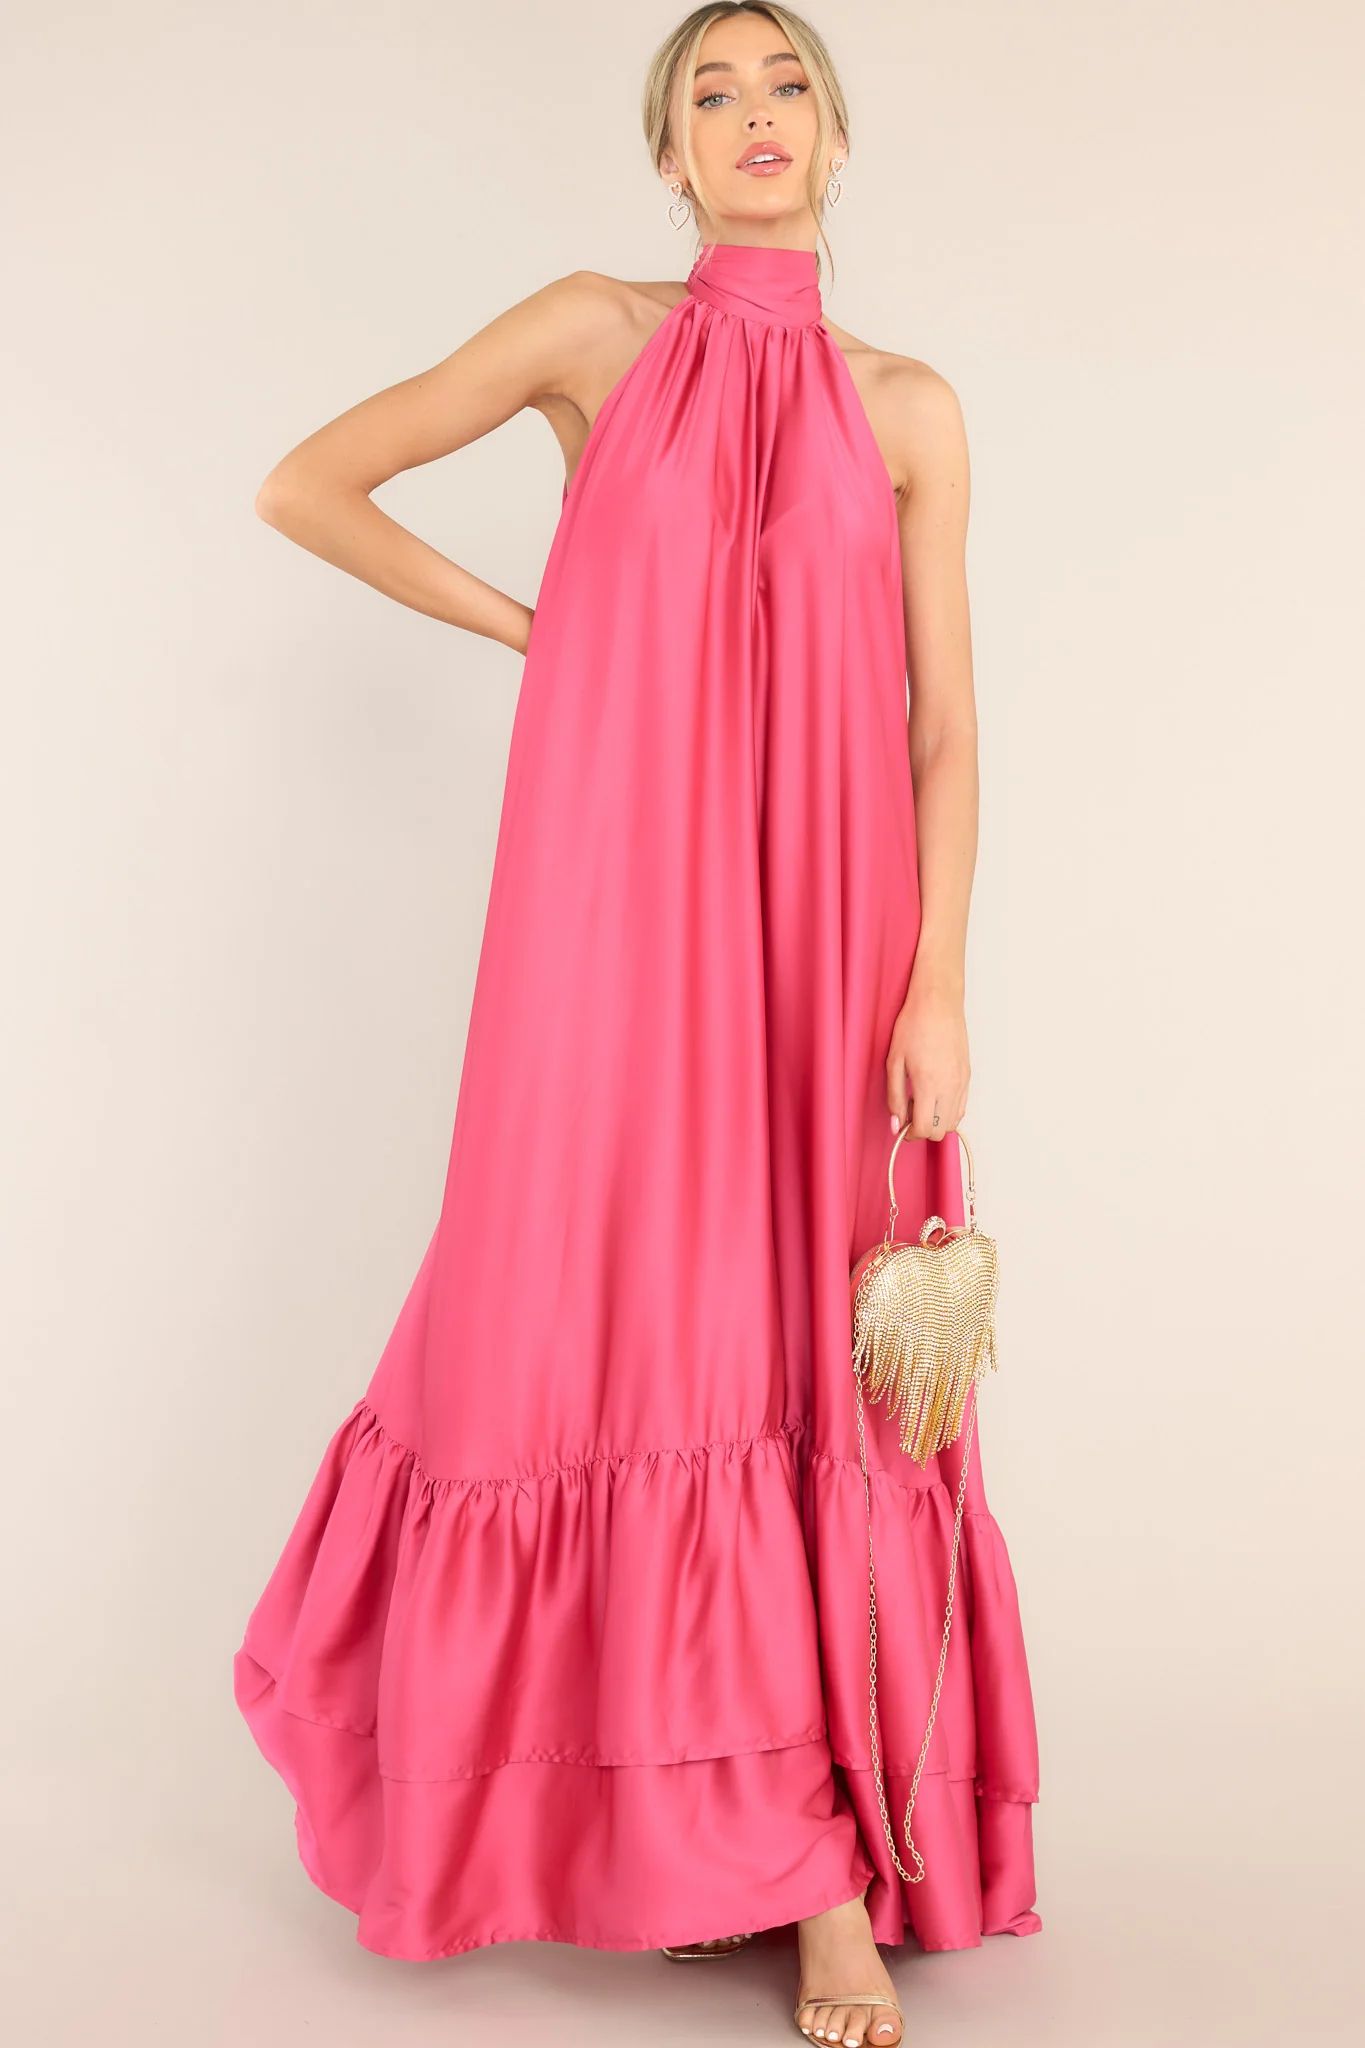 Talk About Beauty Hot Pink Maxi Dress, Affordable Summer Maxi Fashion Amazon | Red Dress 